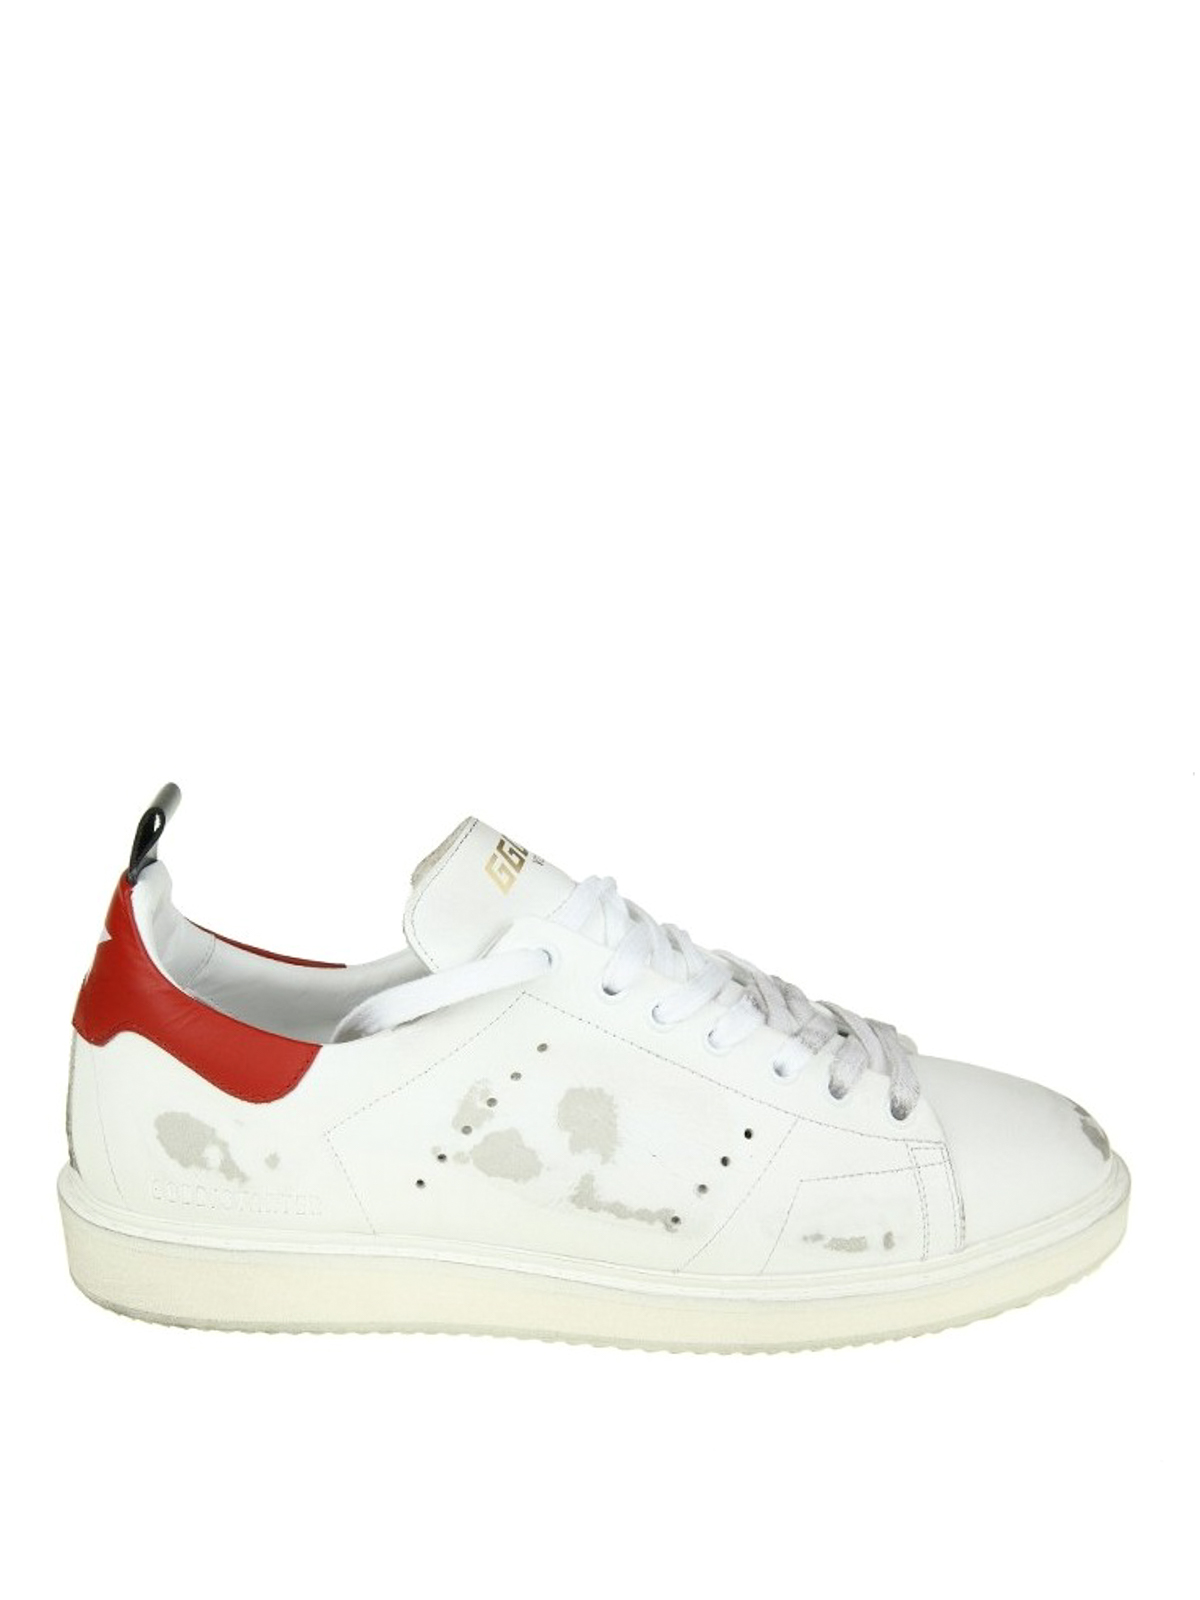 Starter Leather Sneakers